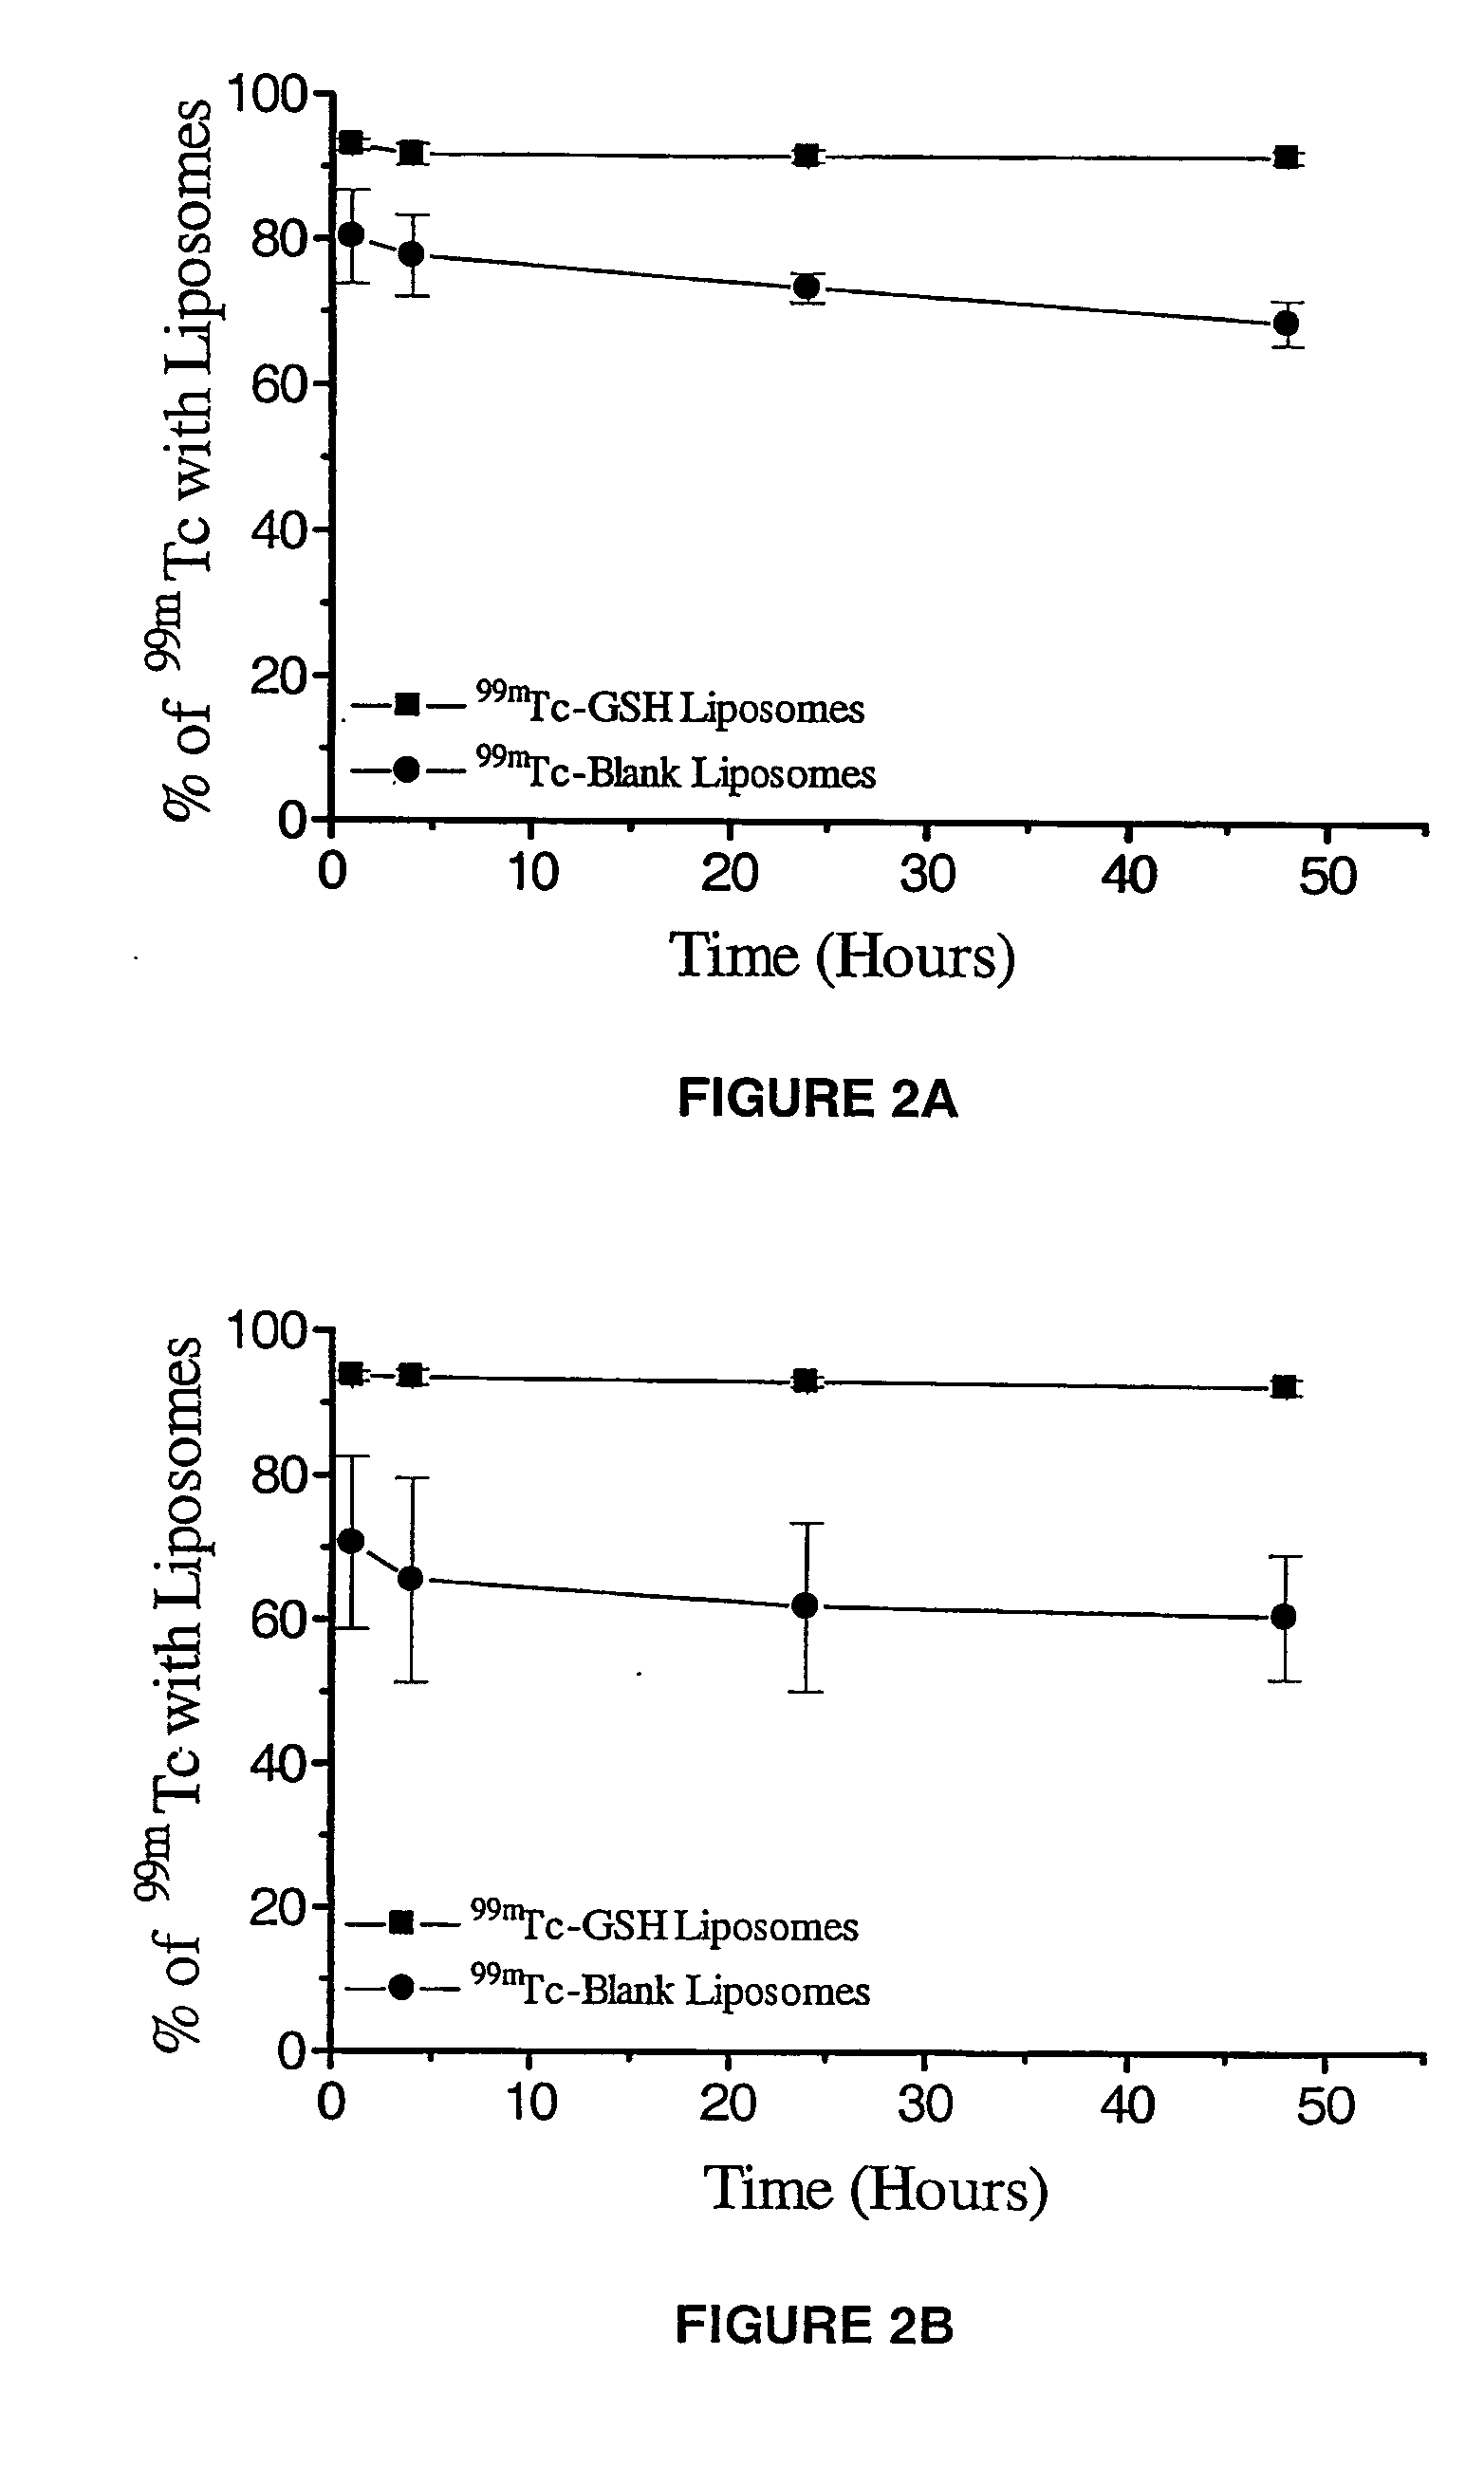 Radiolabeled compounds and liposomes and their method of making and using same